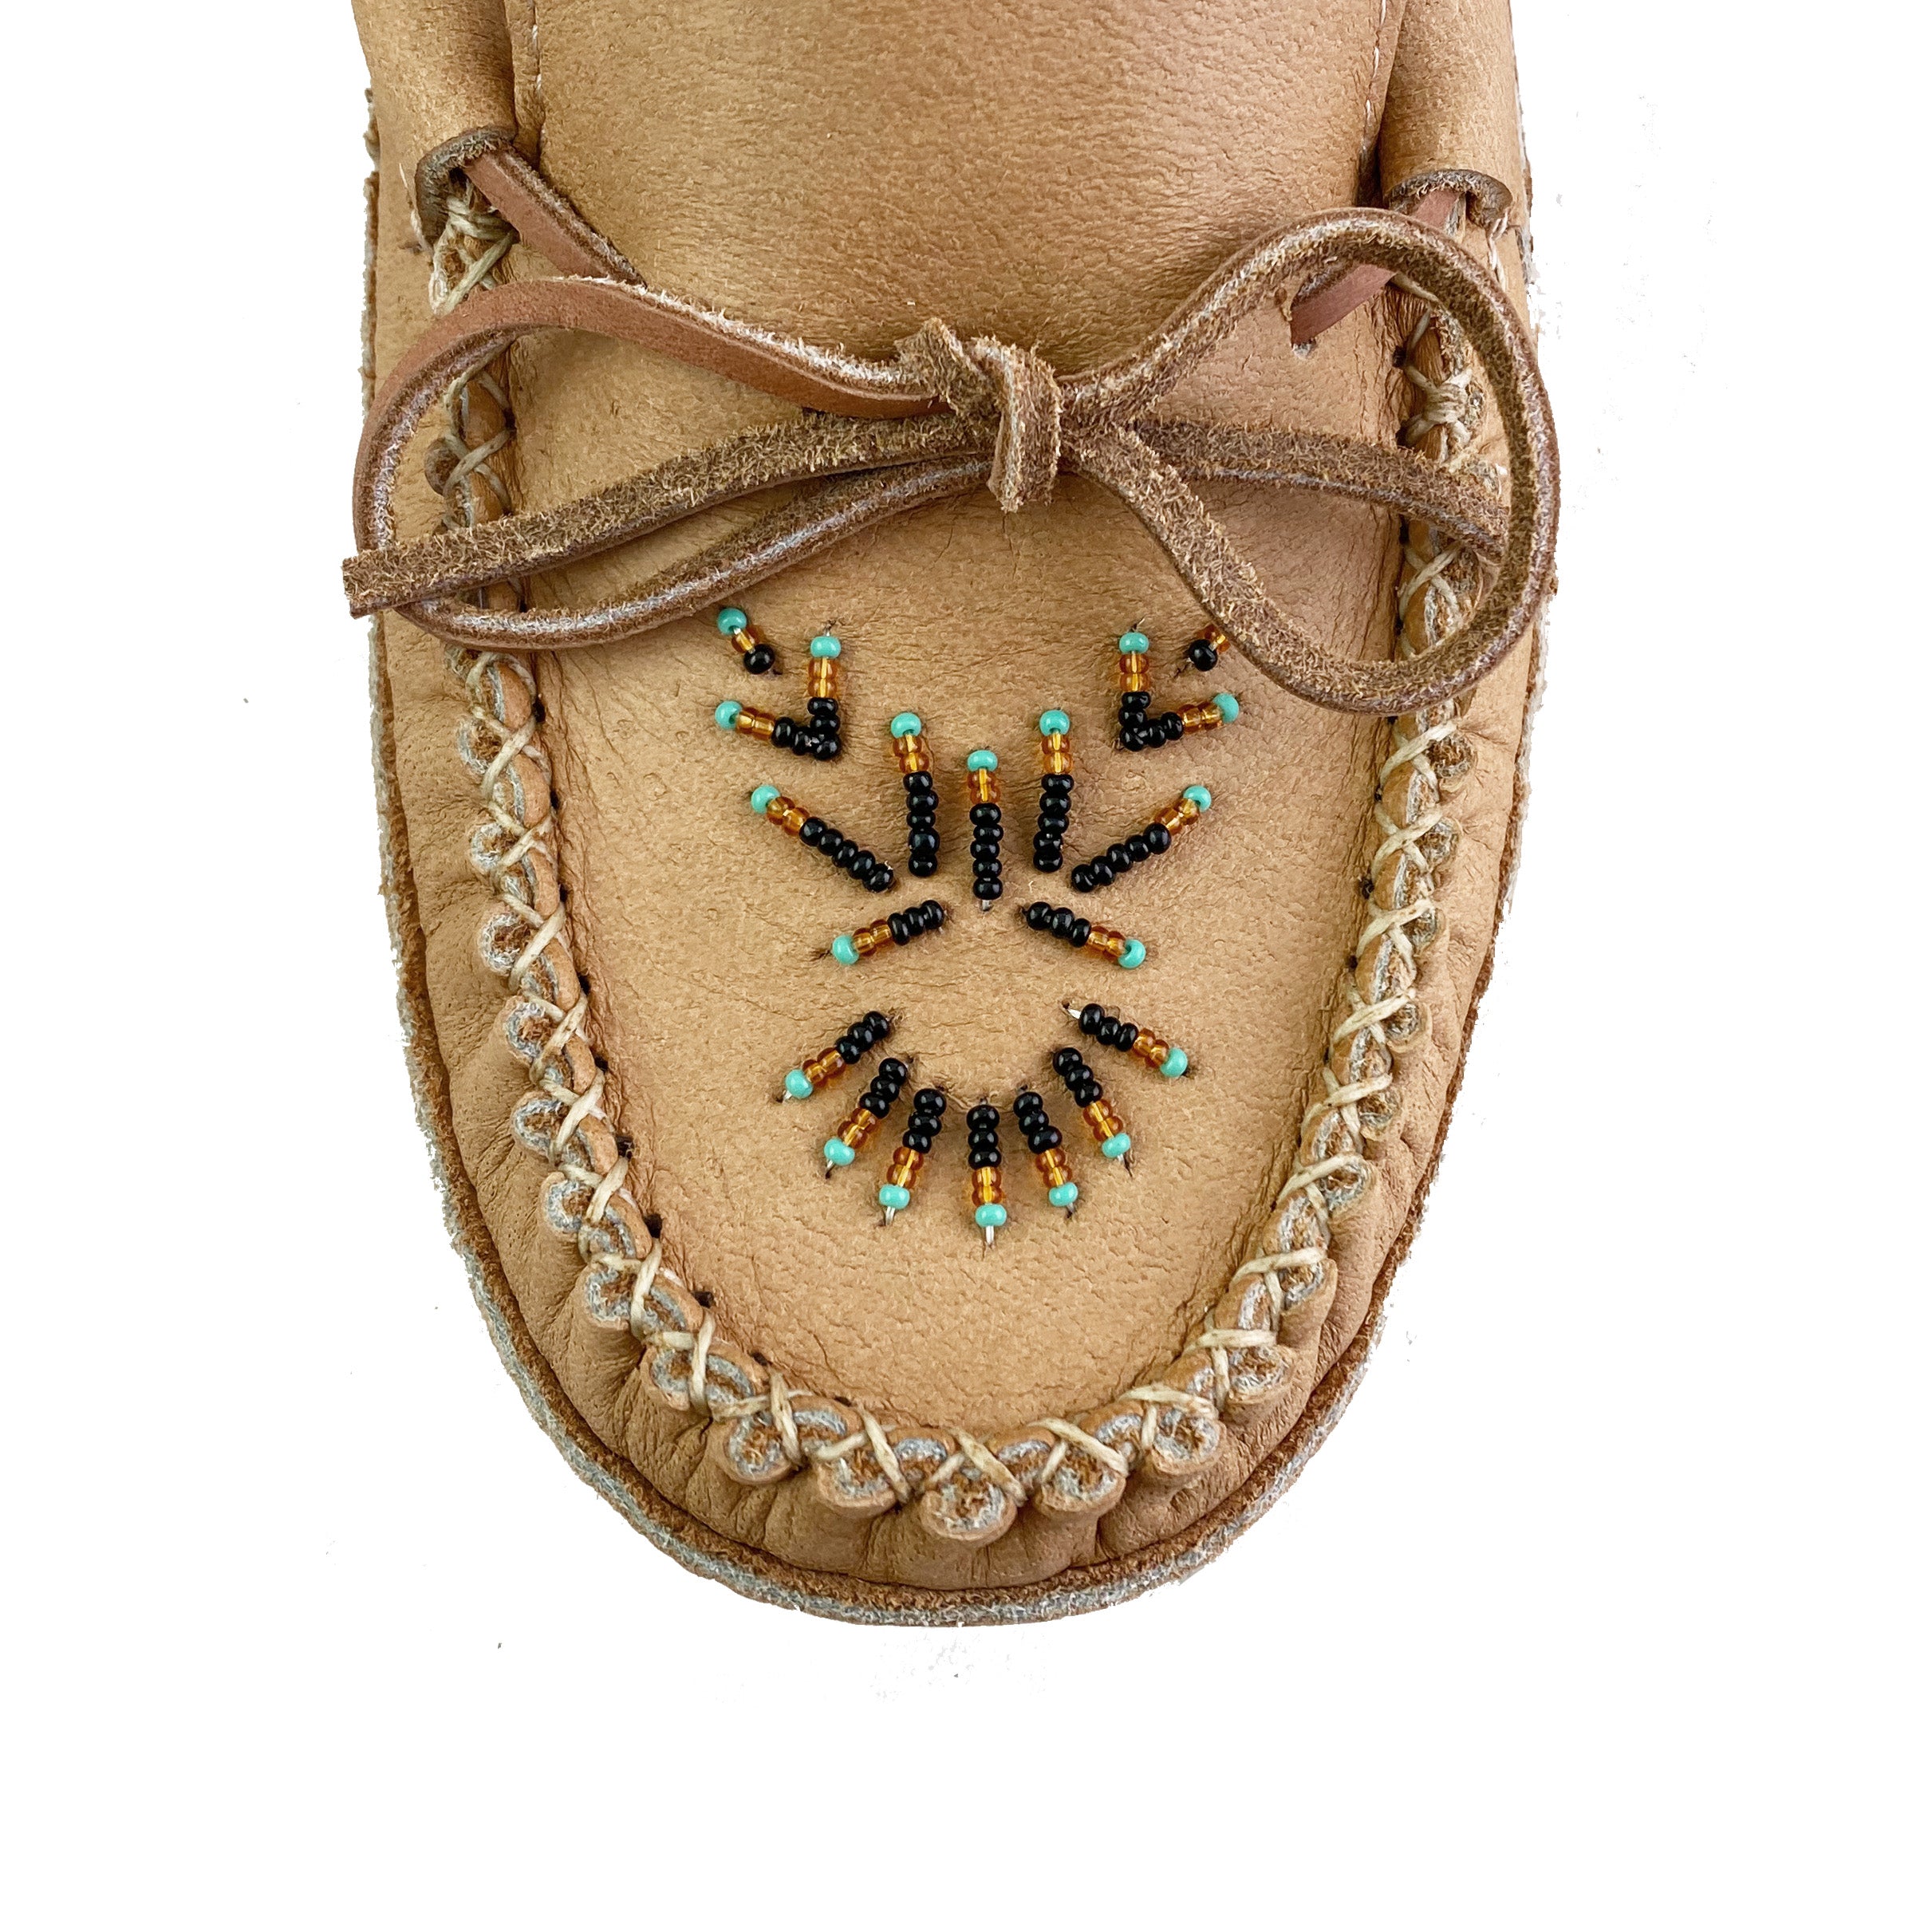 Authentic Native American Genuine Suede Leather Mukluk Moccasin